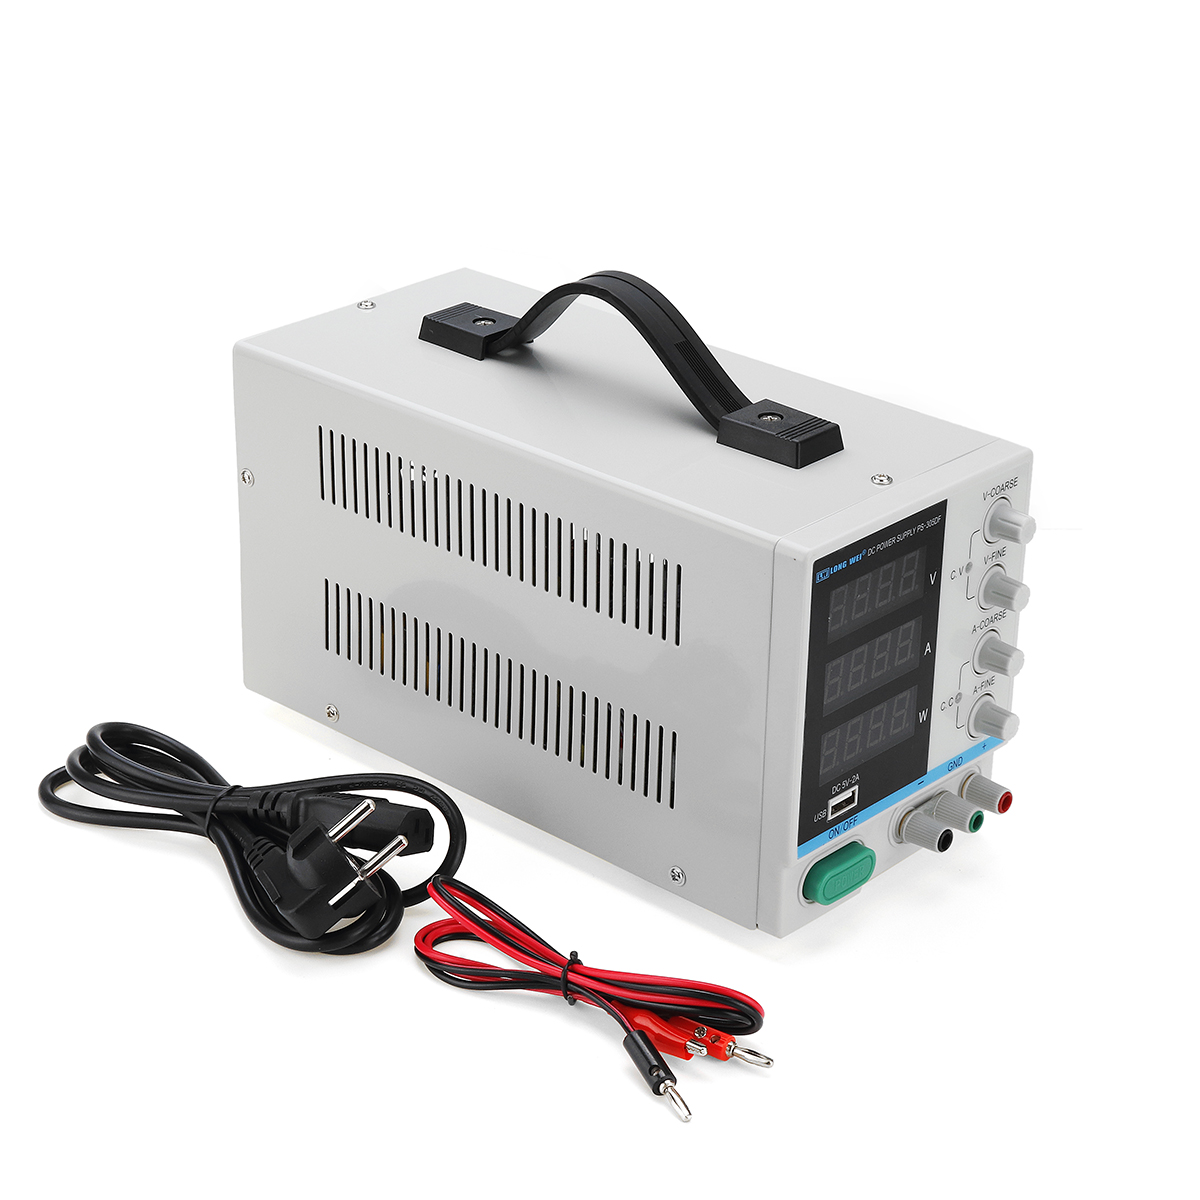 LONG-WEI-PS305DF-DC-Power-Supply-4-Digtal-Display-30V-5A-Adjustable-Switching-Power-Supply-w-USB-Int-1433465-10